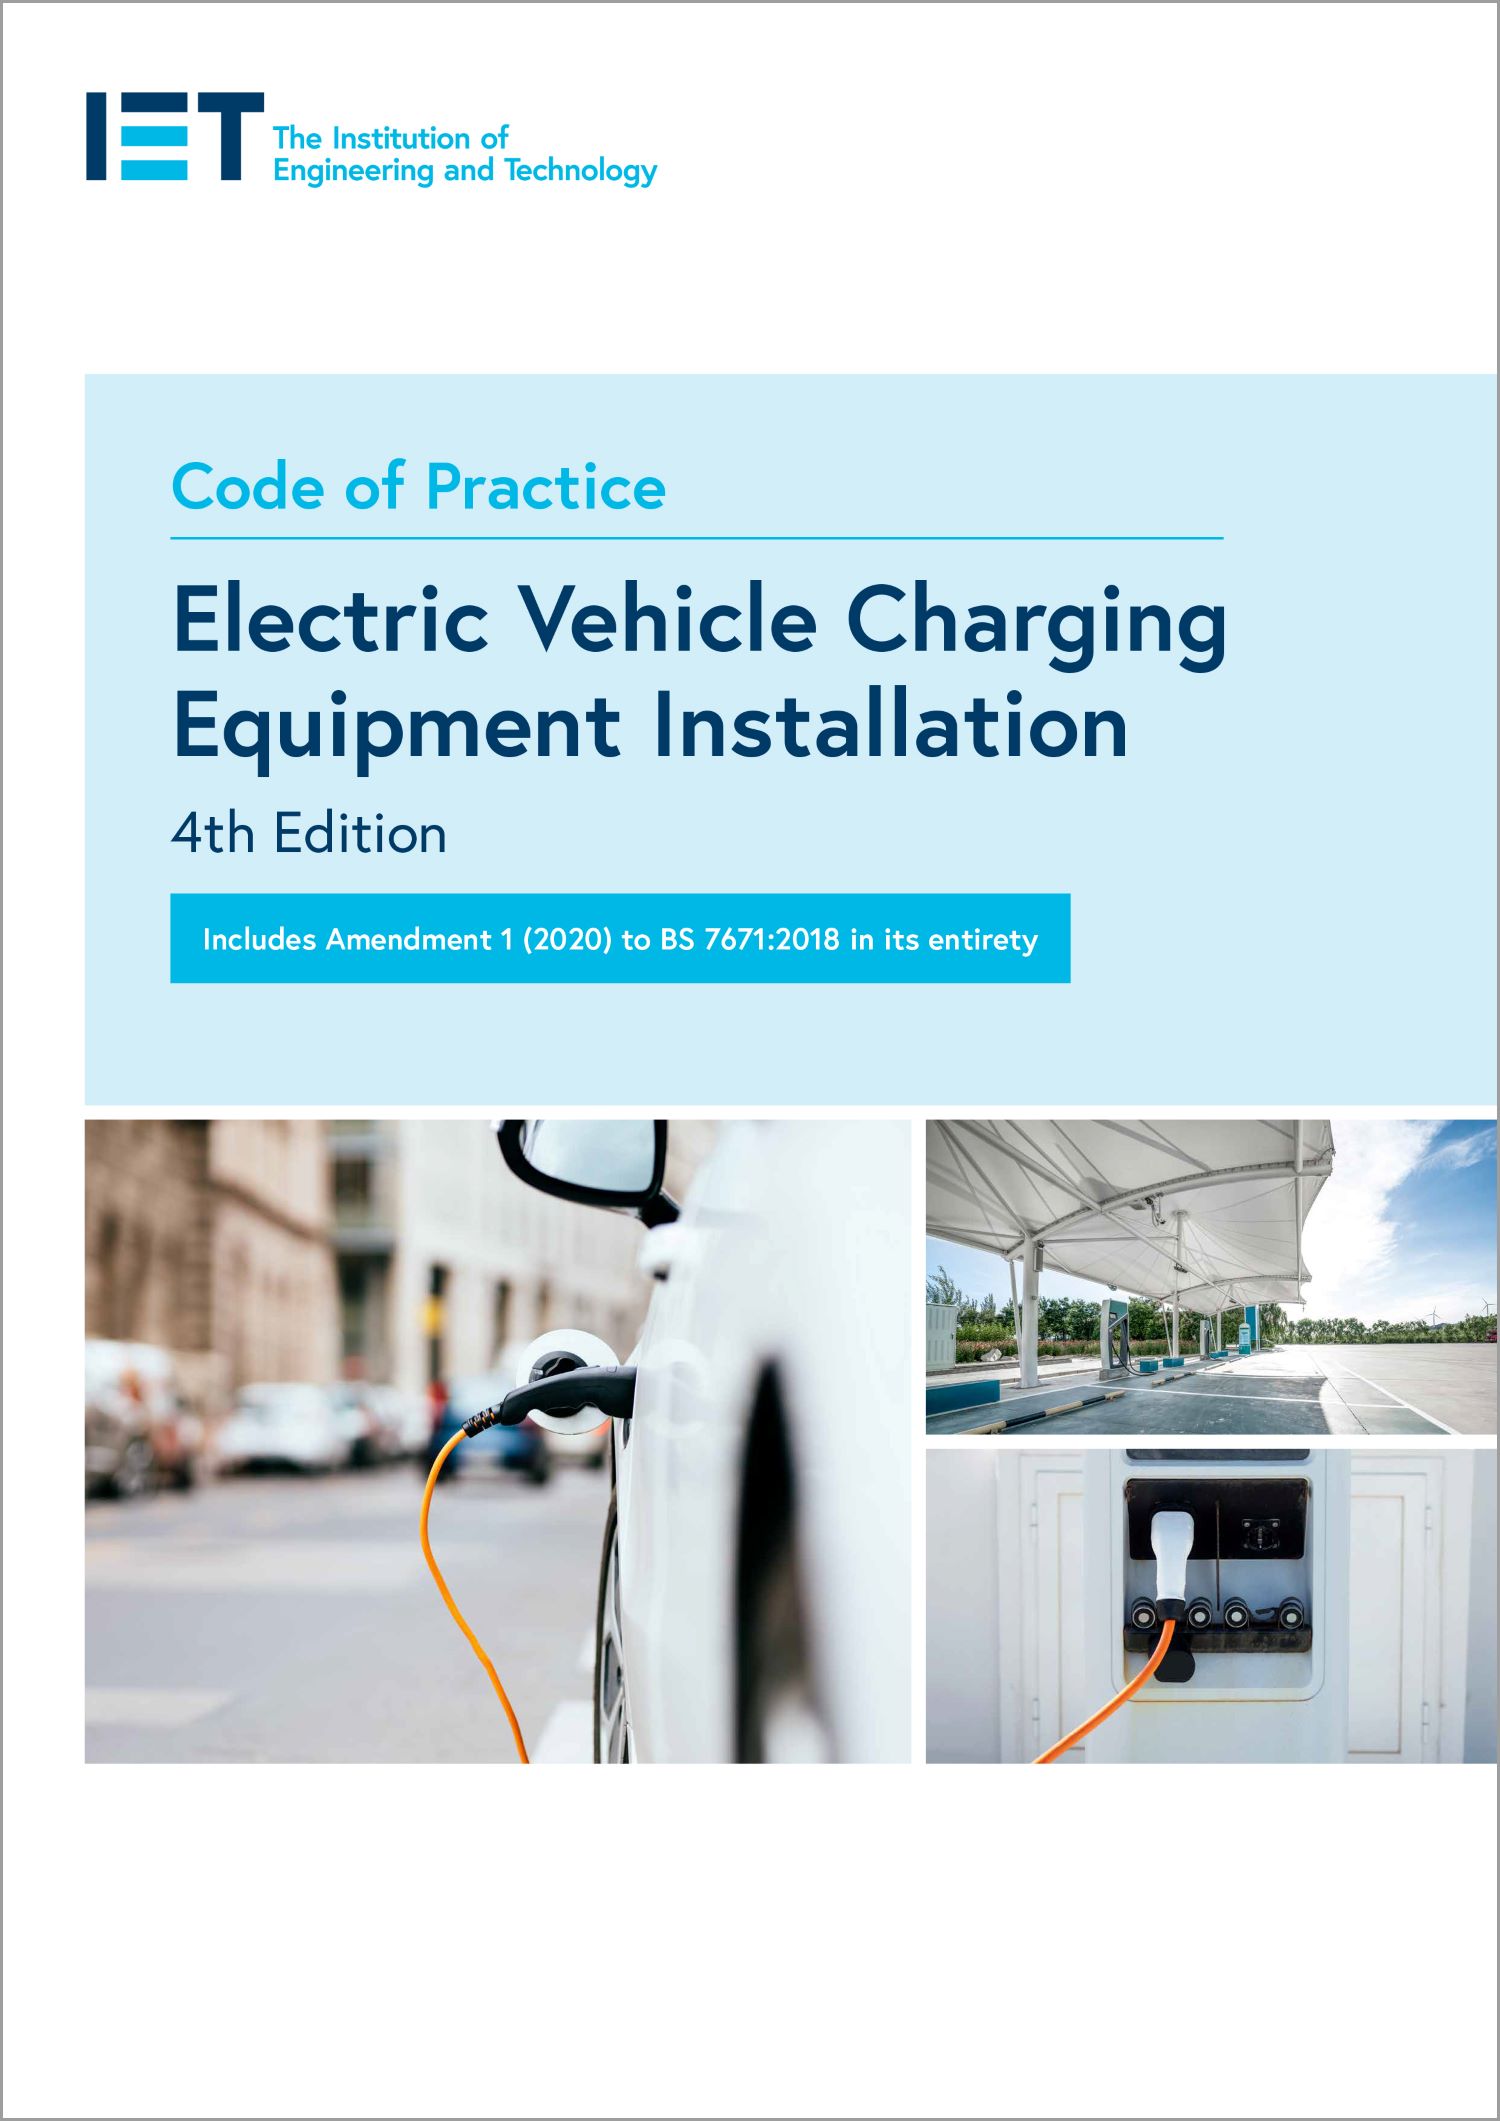 Code of Practice for Electric Vehicle Charging Equipment Installation, 4th Edition